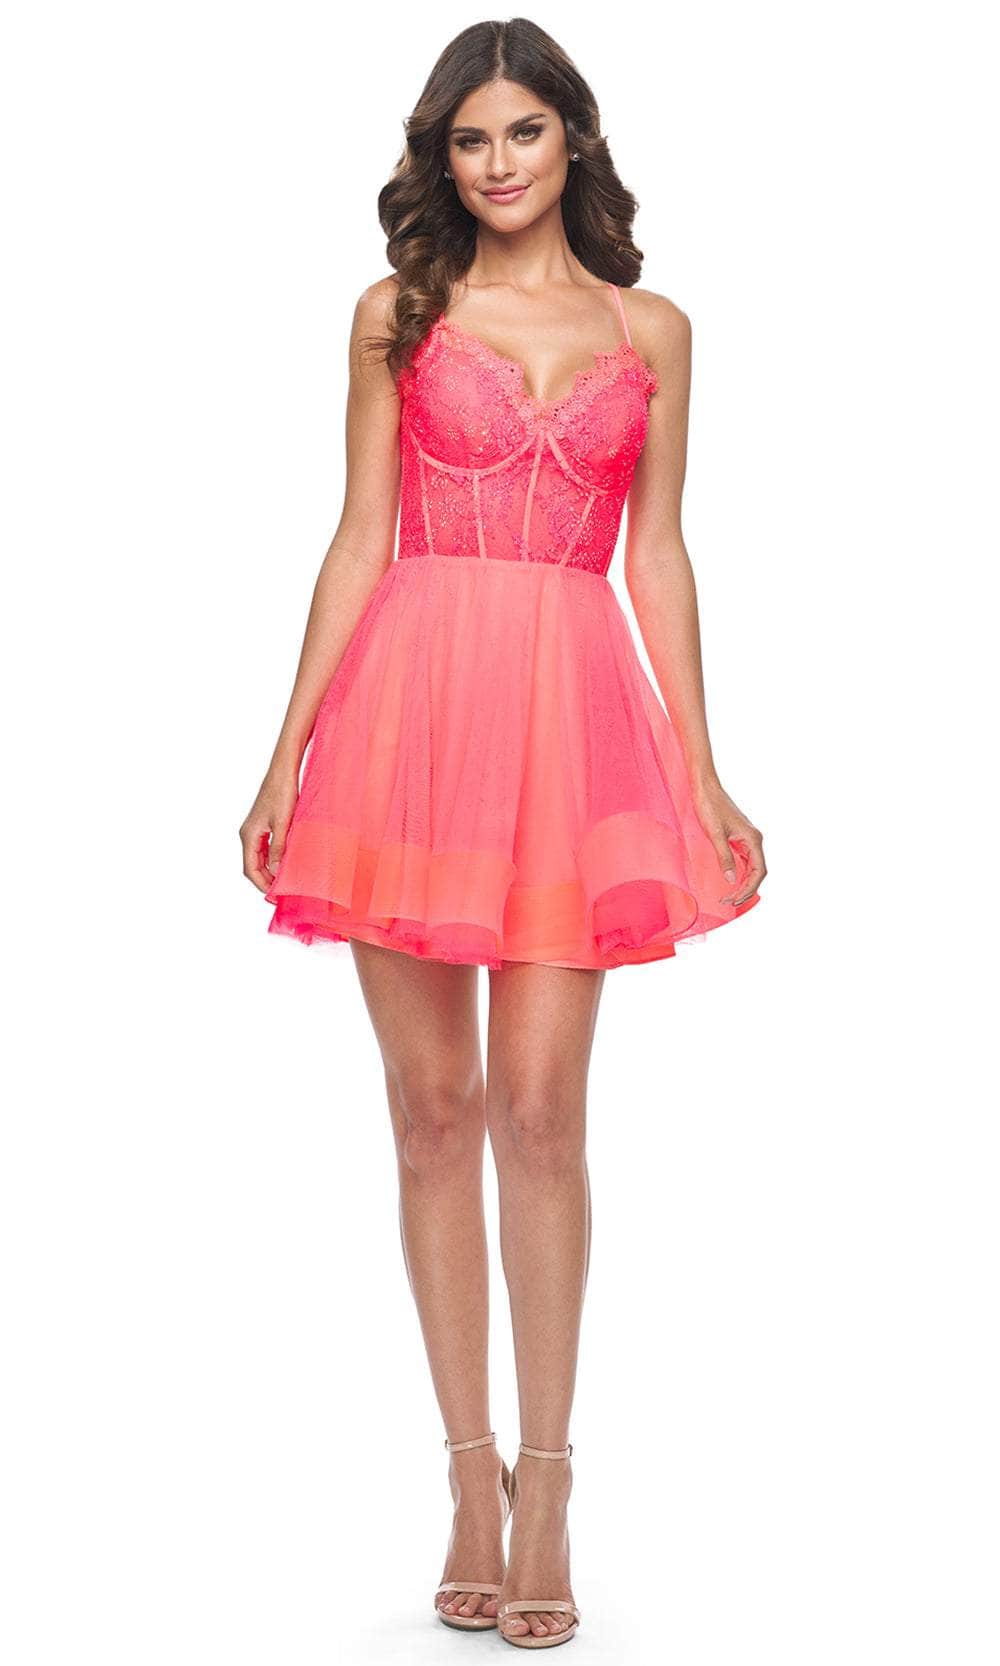 Image of La Femme 31469 - Beaded Lace Sweetheart Cocktail Dress